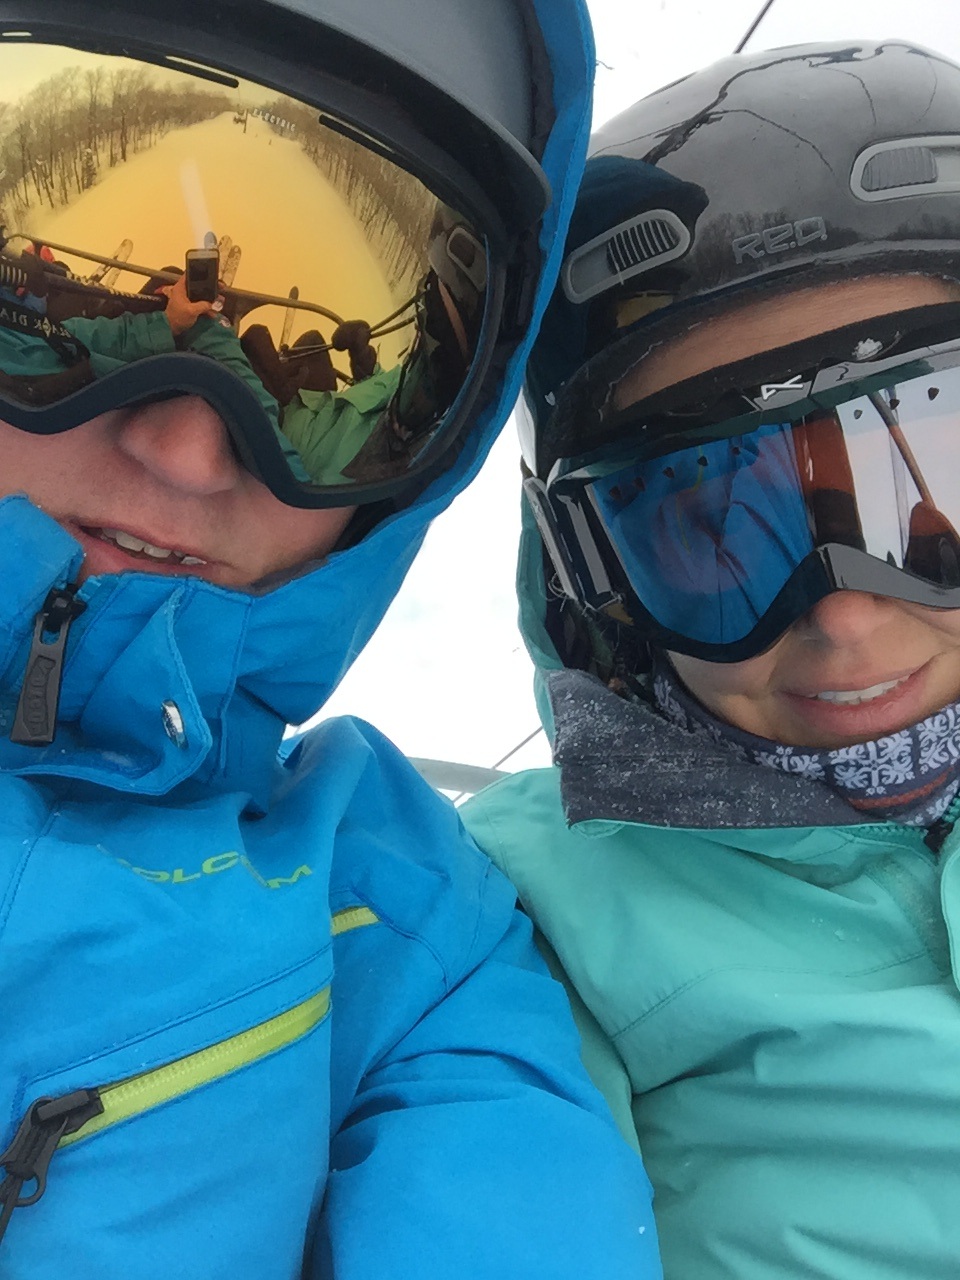 chairlift selfie mirrored goggles blue jacket